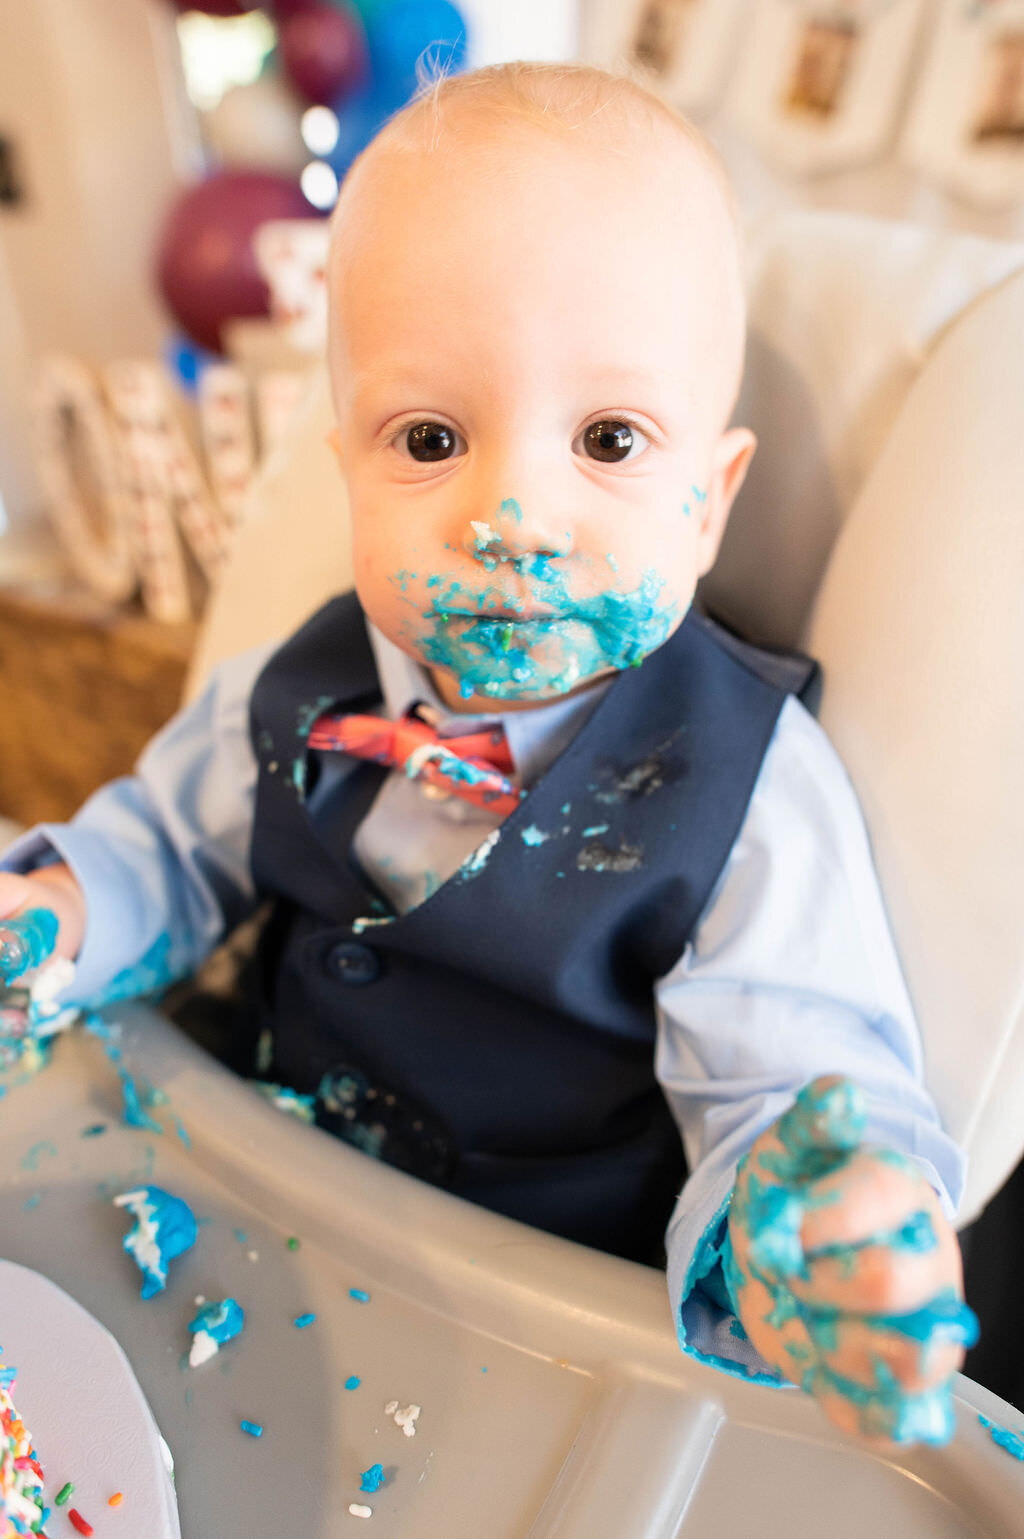 A baby in a suit covered in blue frosting.